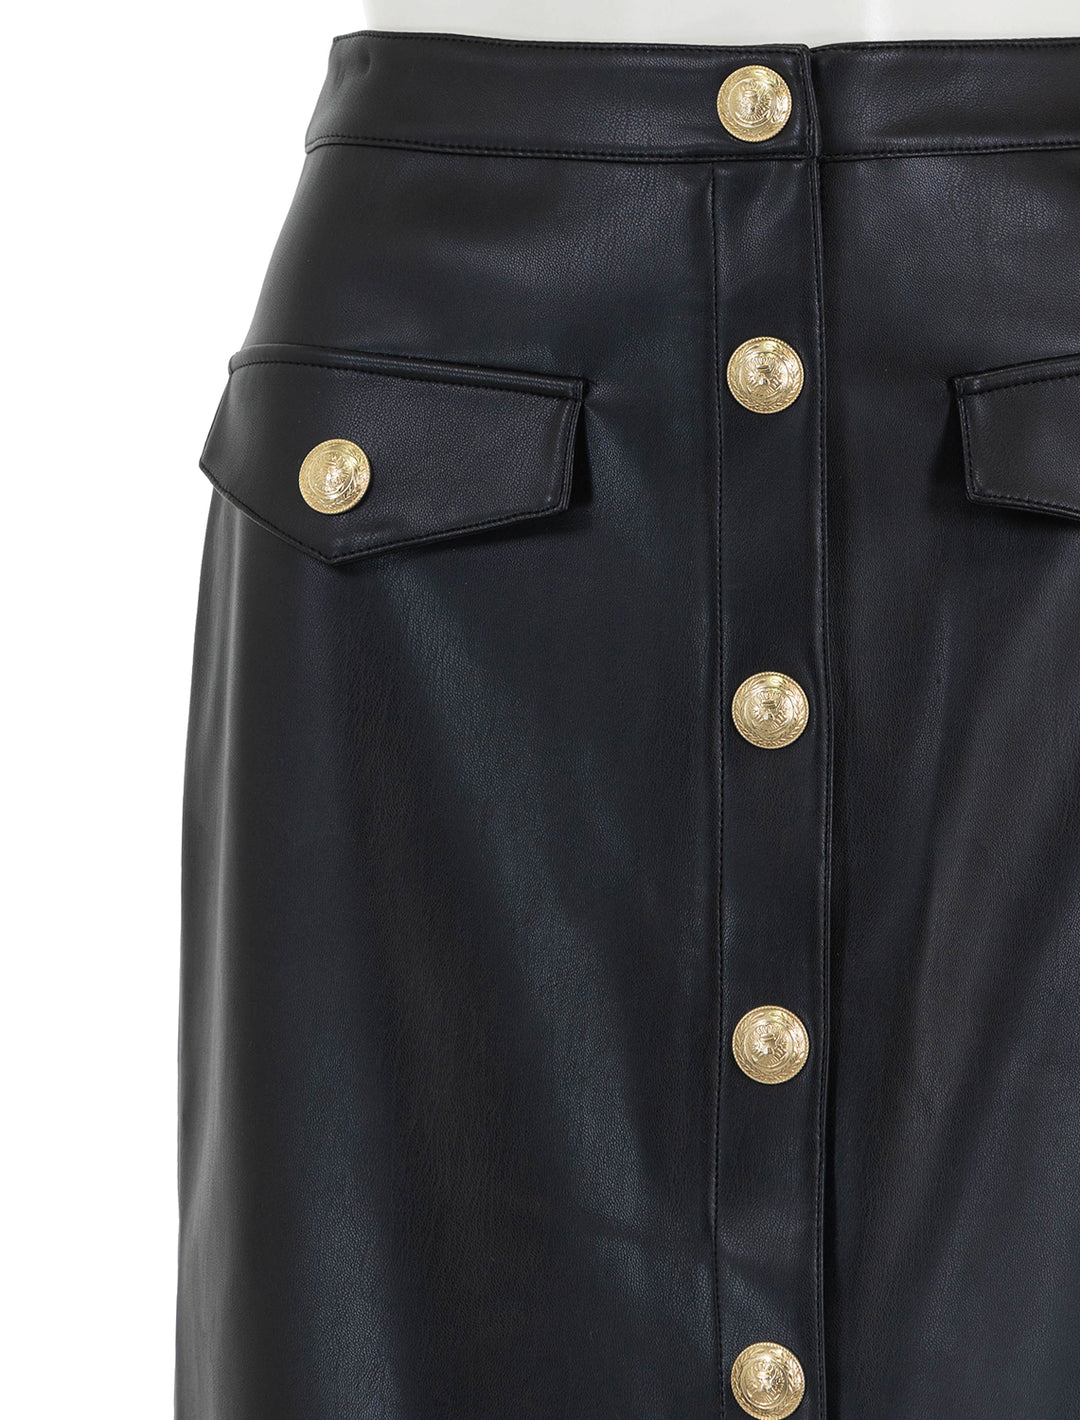 Close-up view of L'agence's milann midi skirt in black.